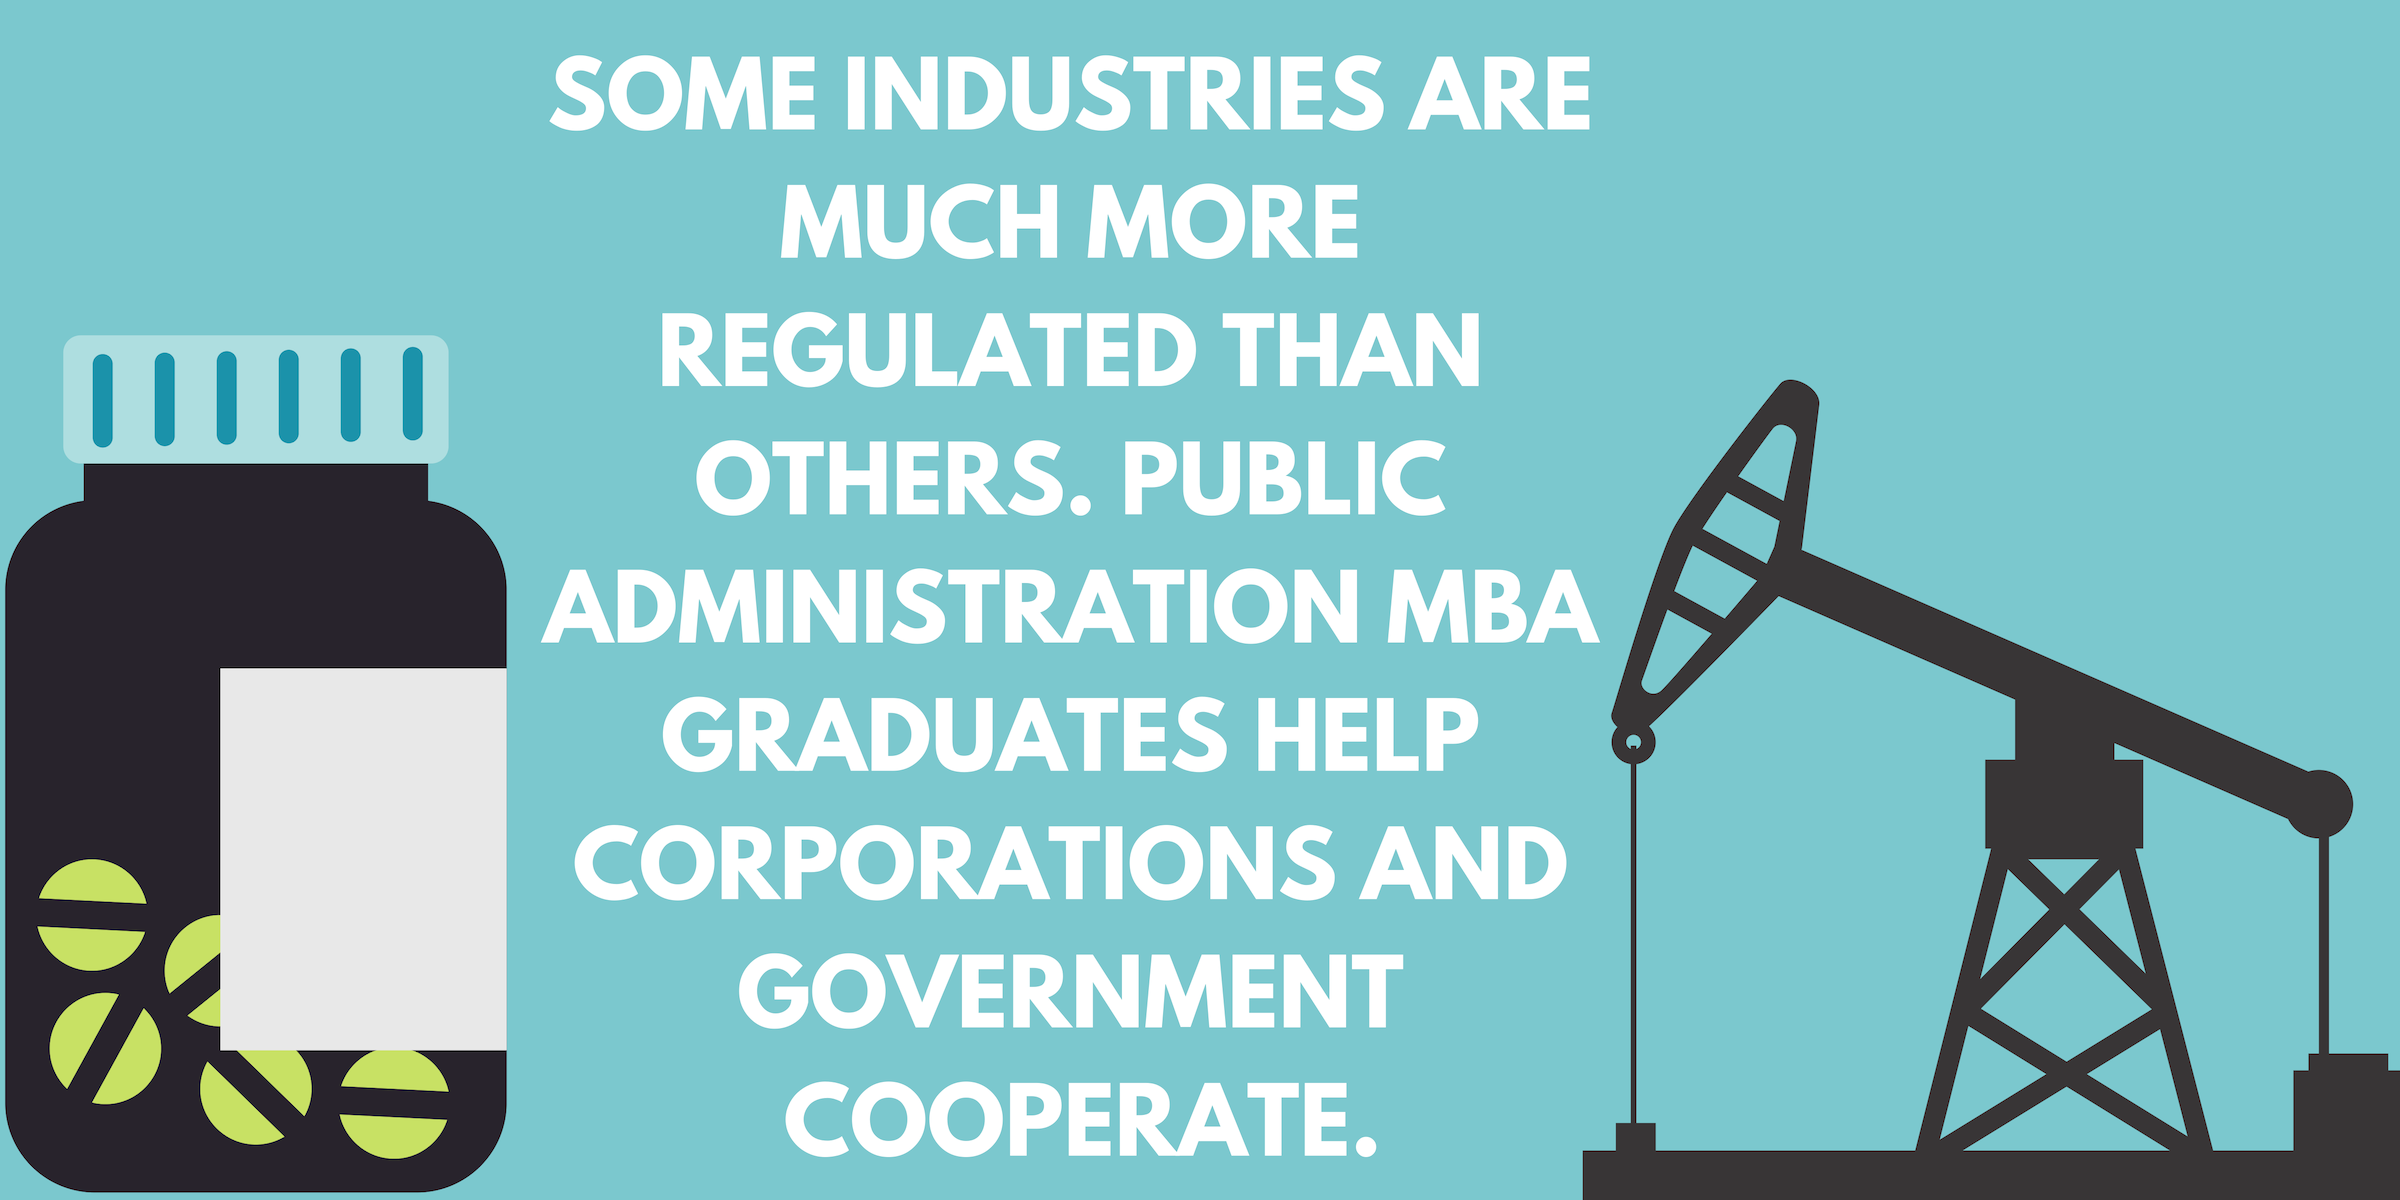 Some industries are much more regulated than others. Public administration MBA graduates help corporations and government cooperate